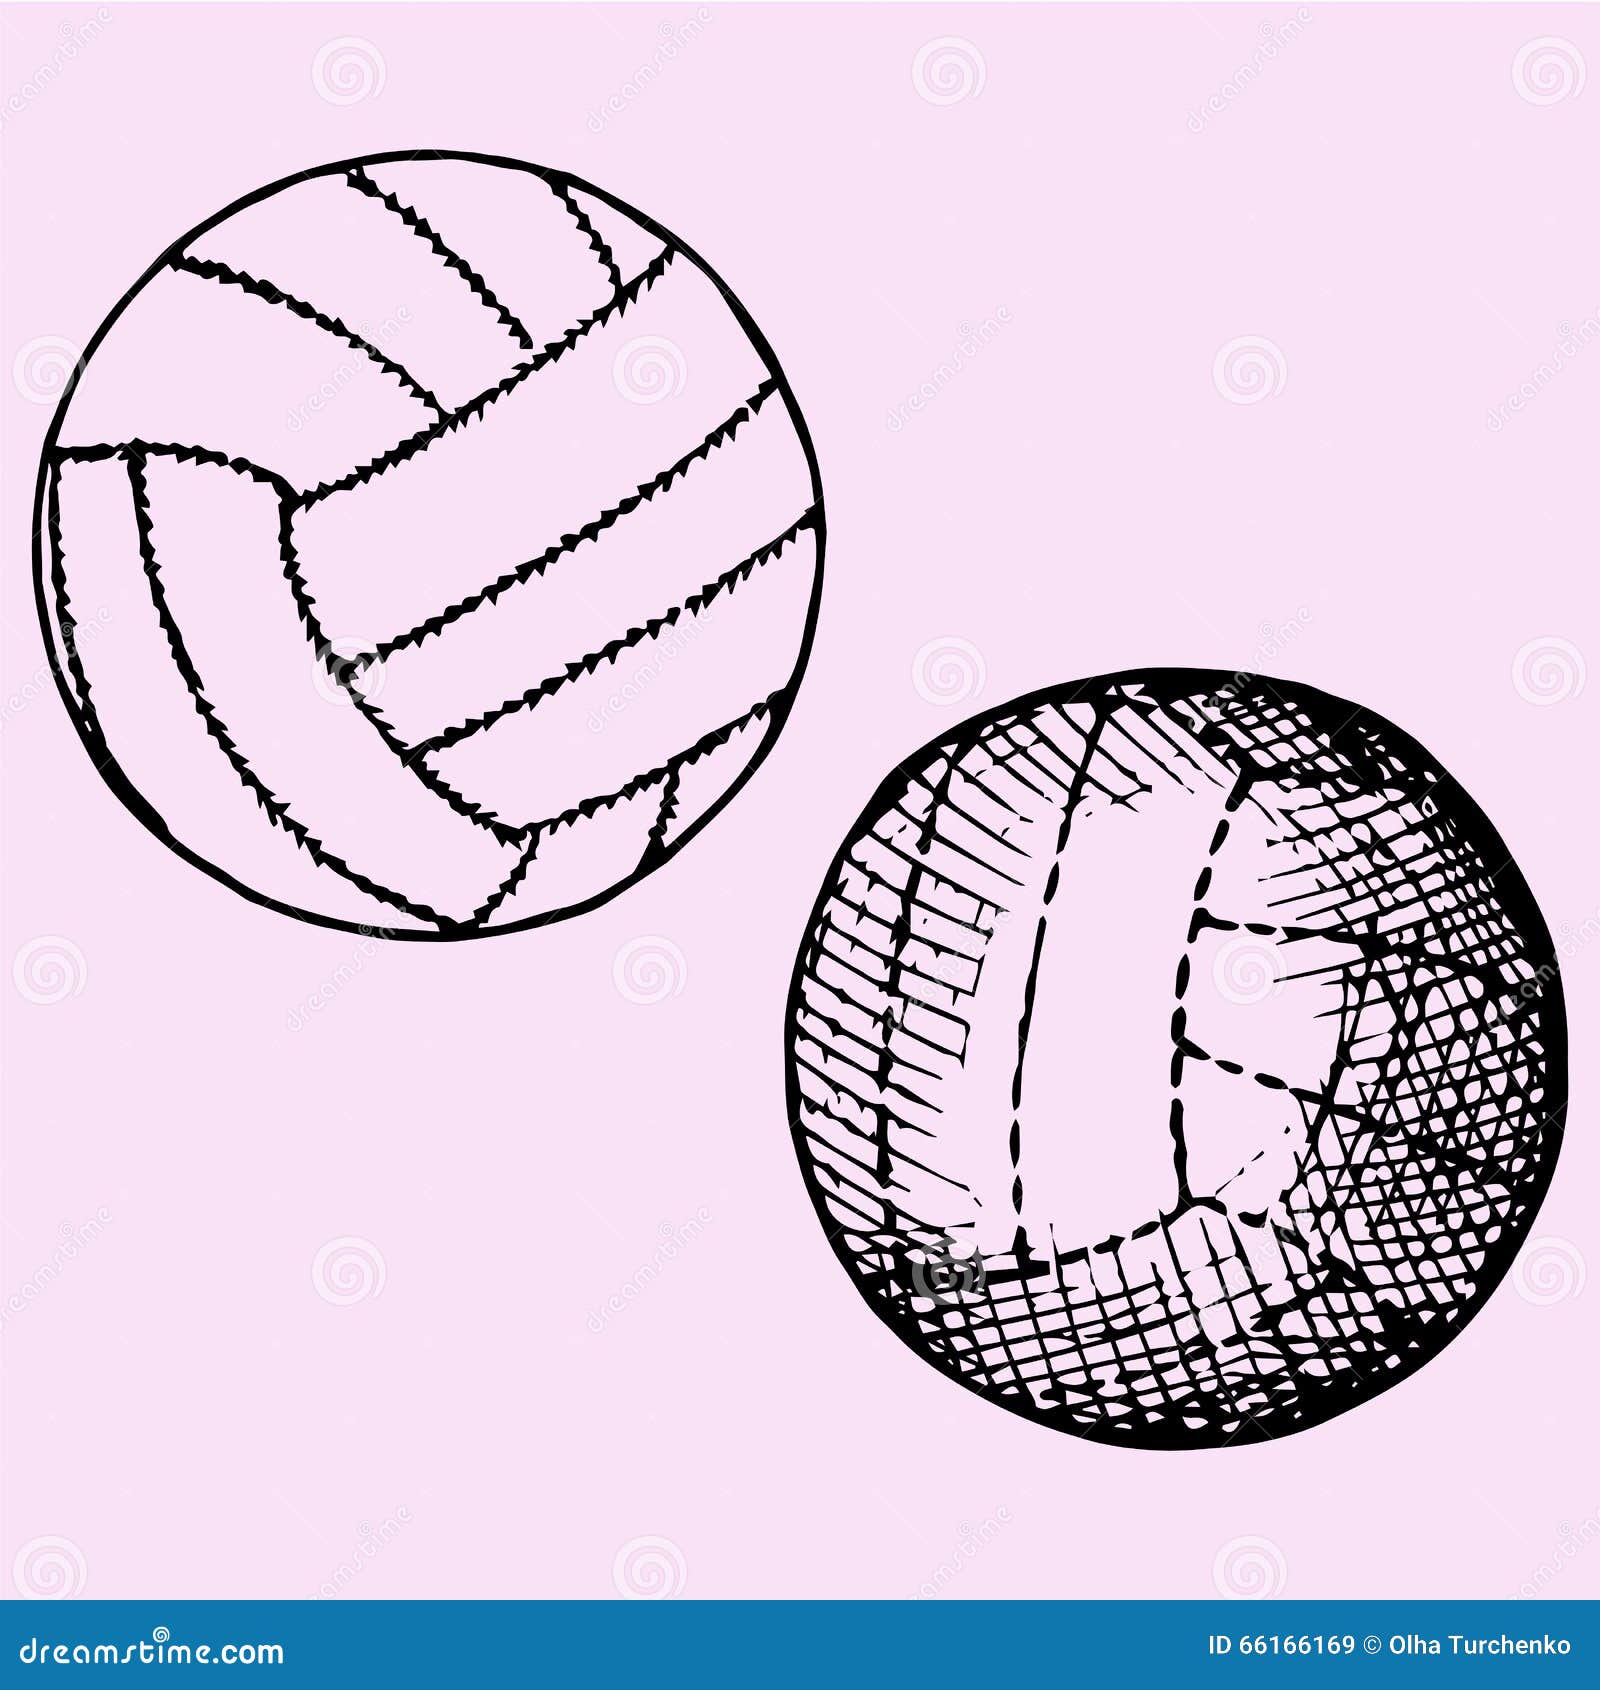 Volleyball ball stock vector. Illustration of competition - 66166169